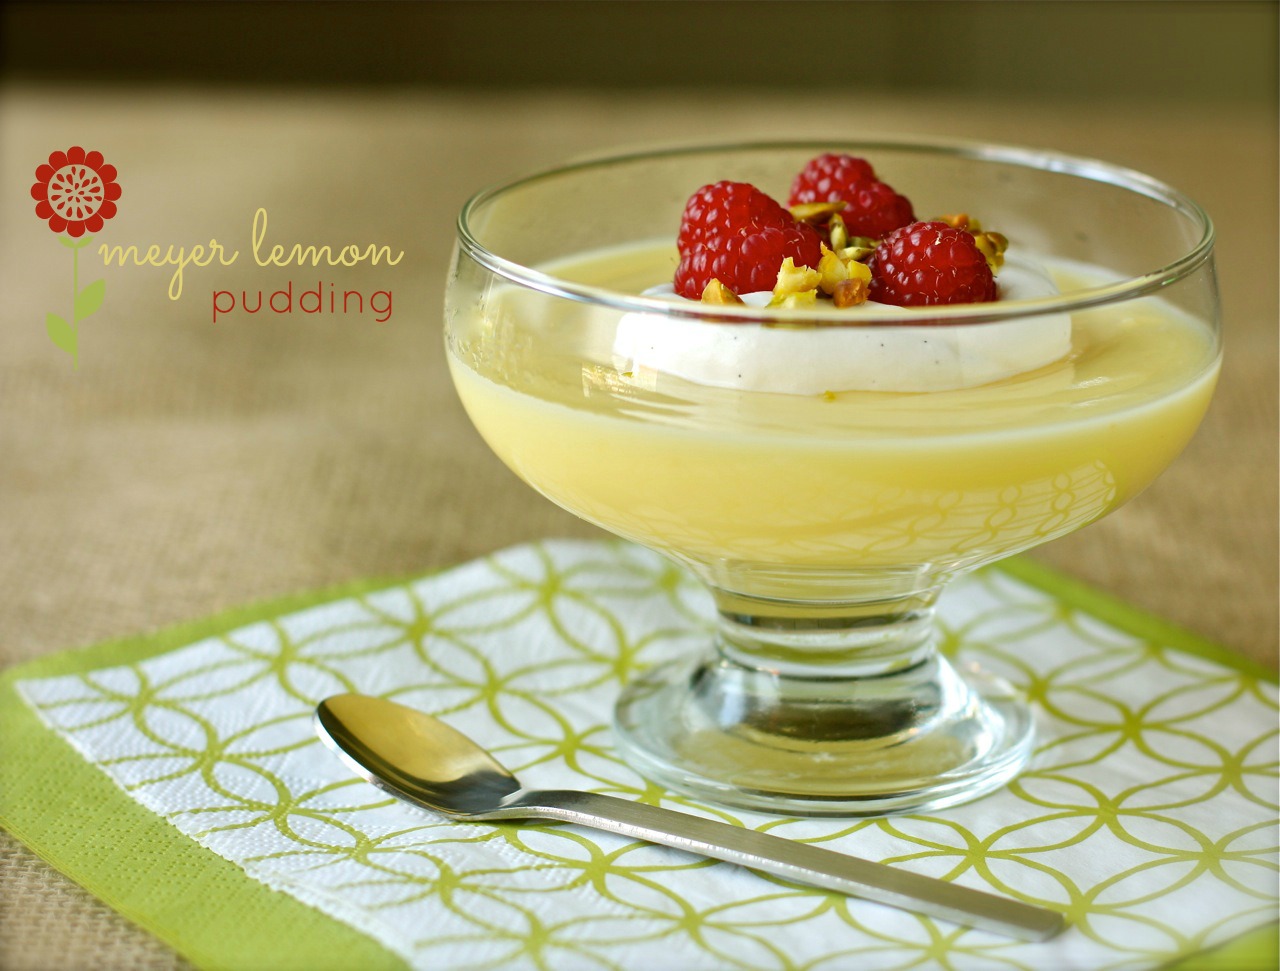 meyer lemon pudding with chantilly cream, raspberries, and pistachios | daisy's world1280 x 971